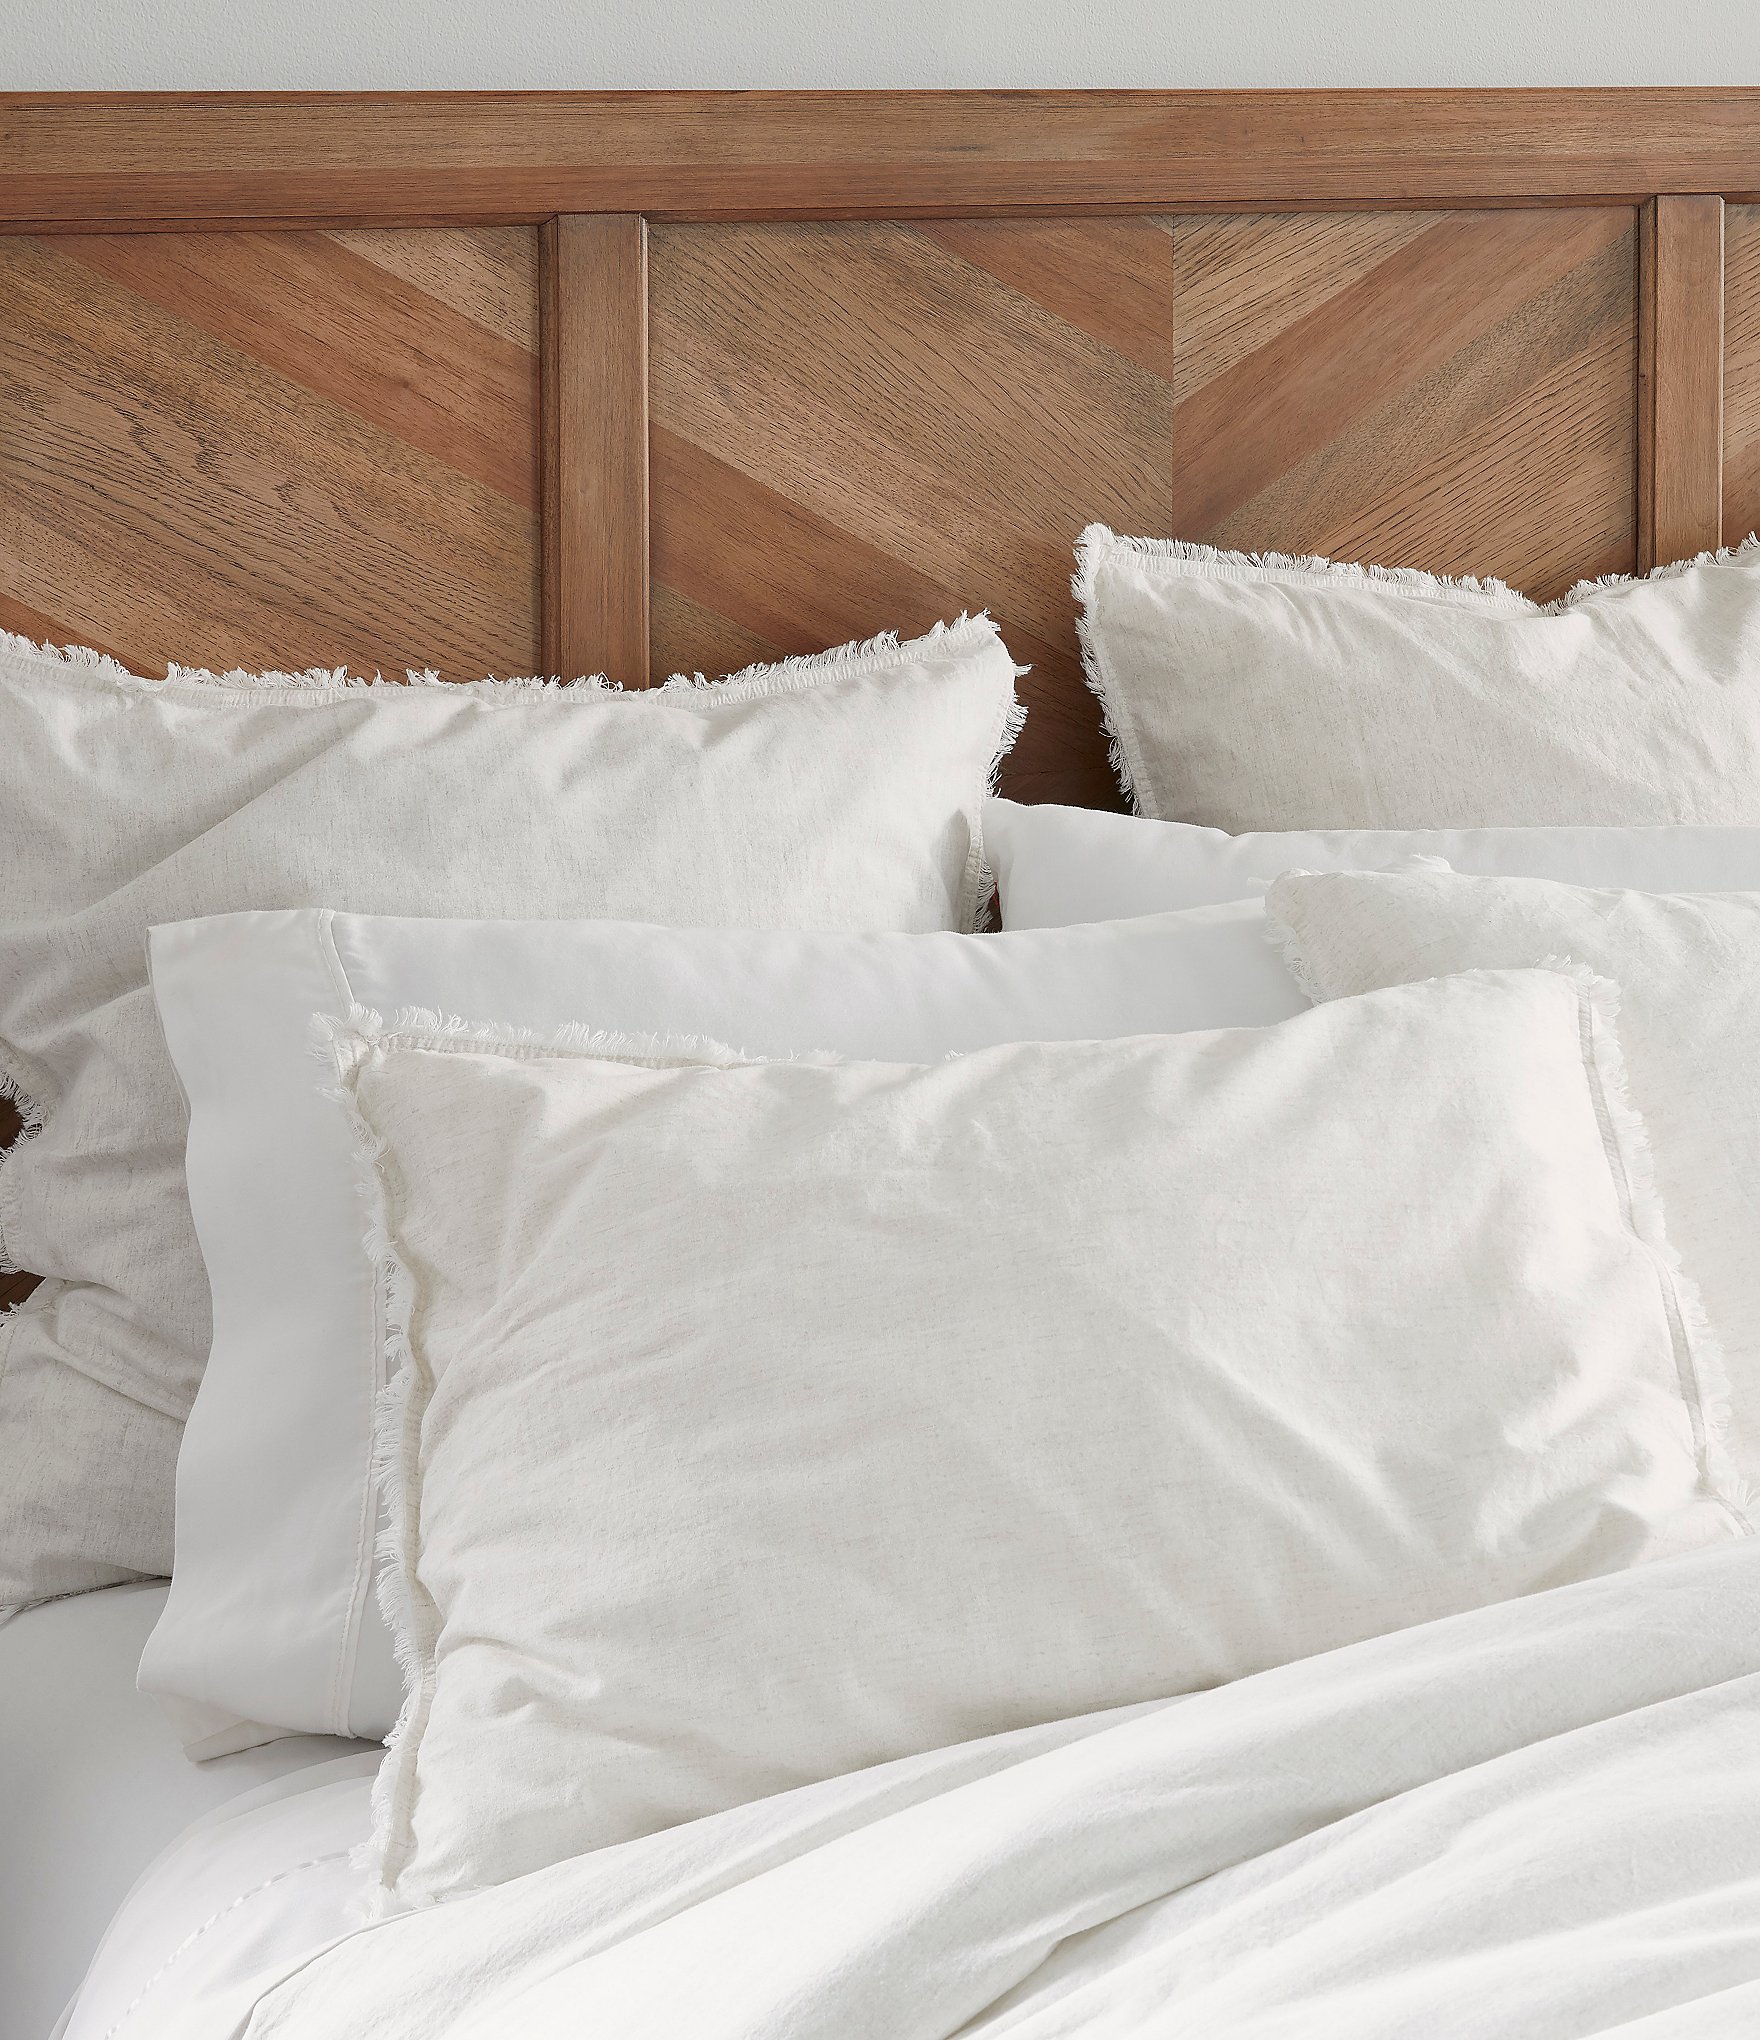 Simplicity Pattern for Bedding and Pillows